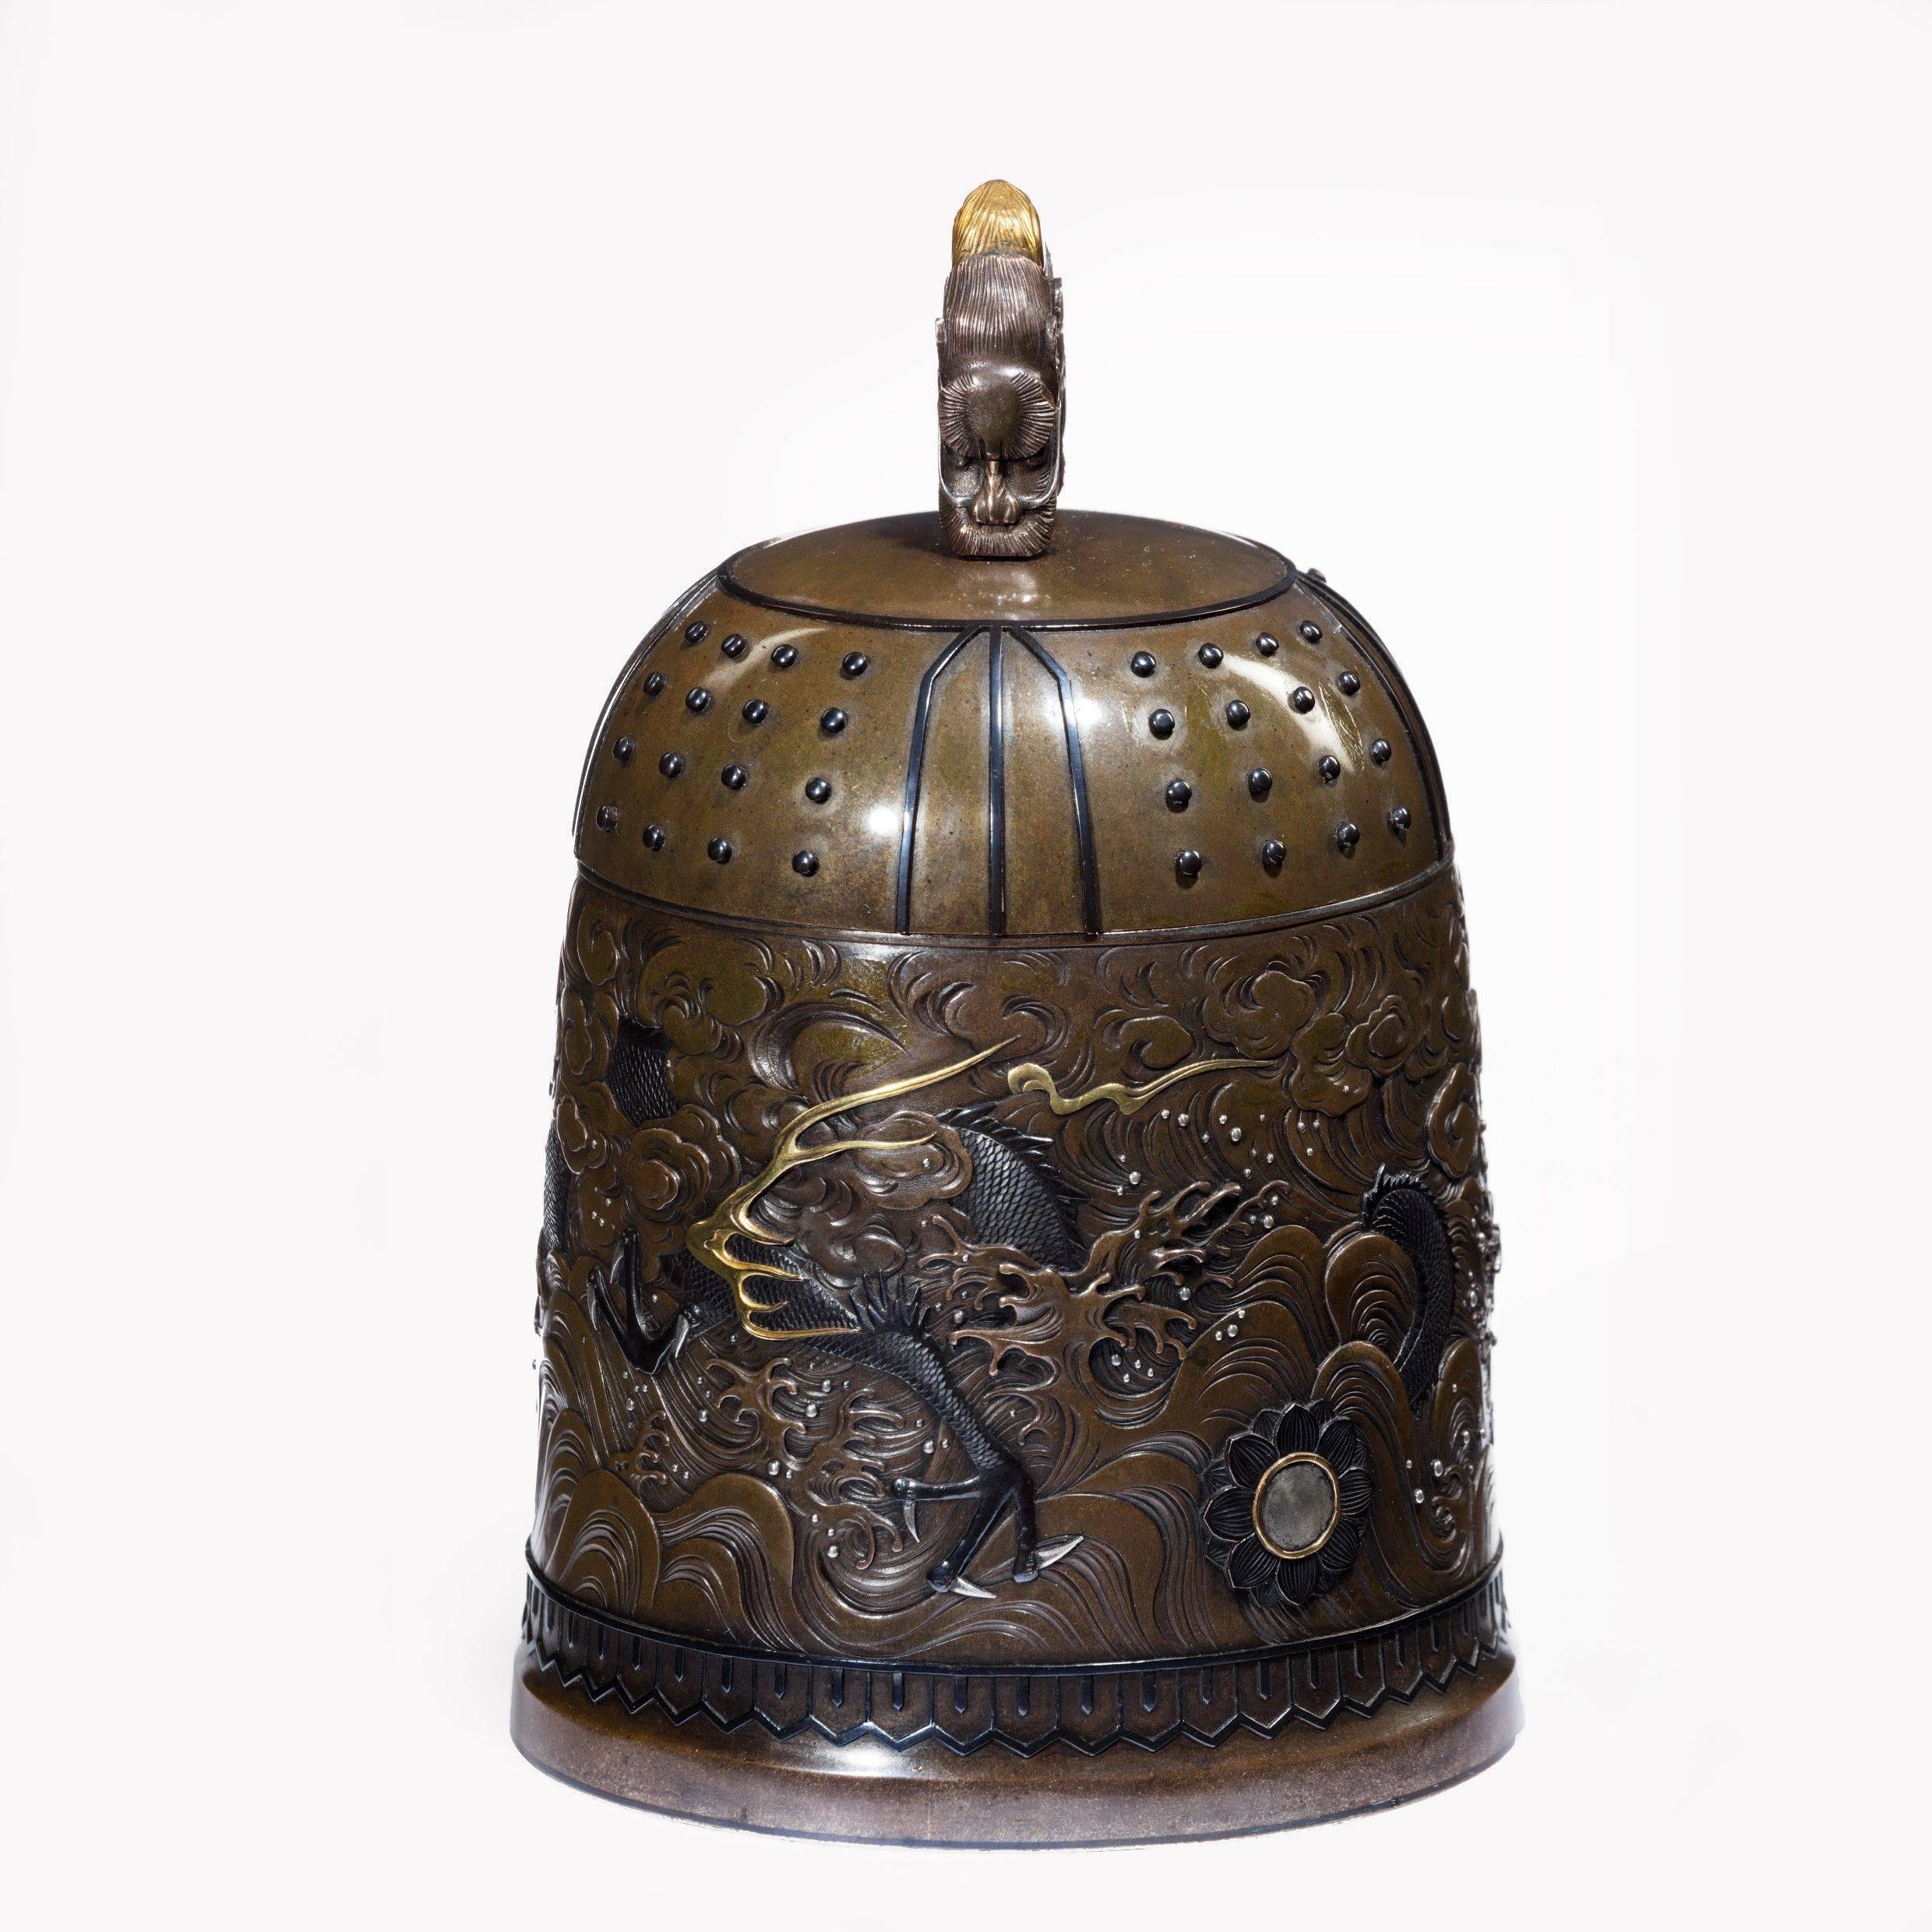 An outstanding Meiji period mixed metal bell casket by the Nogowa foundary,
Of typical form with a shibuichi ground worked in shakudo, silver and gold with a central continuous frieze showing a three-toed dragon amongst roiling clouds and